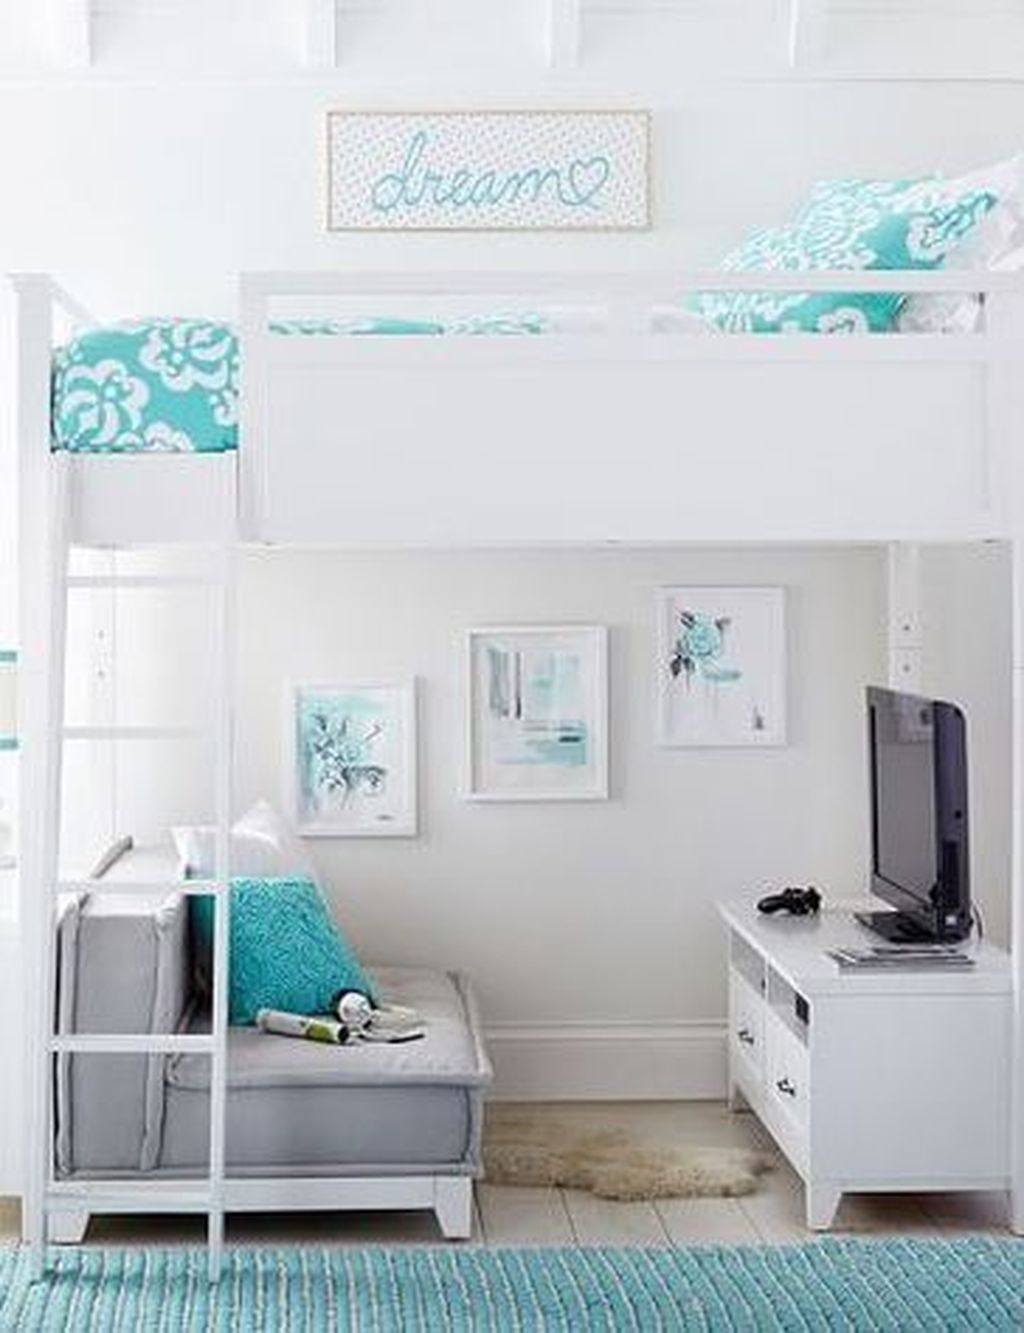 Stunning Teens Bedrooms Design Ideas For Small Spaces To Try 09